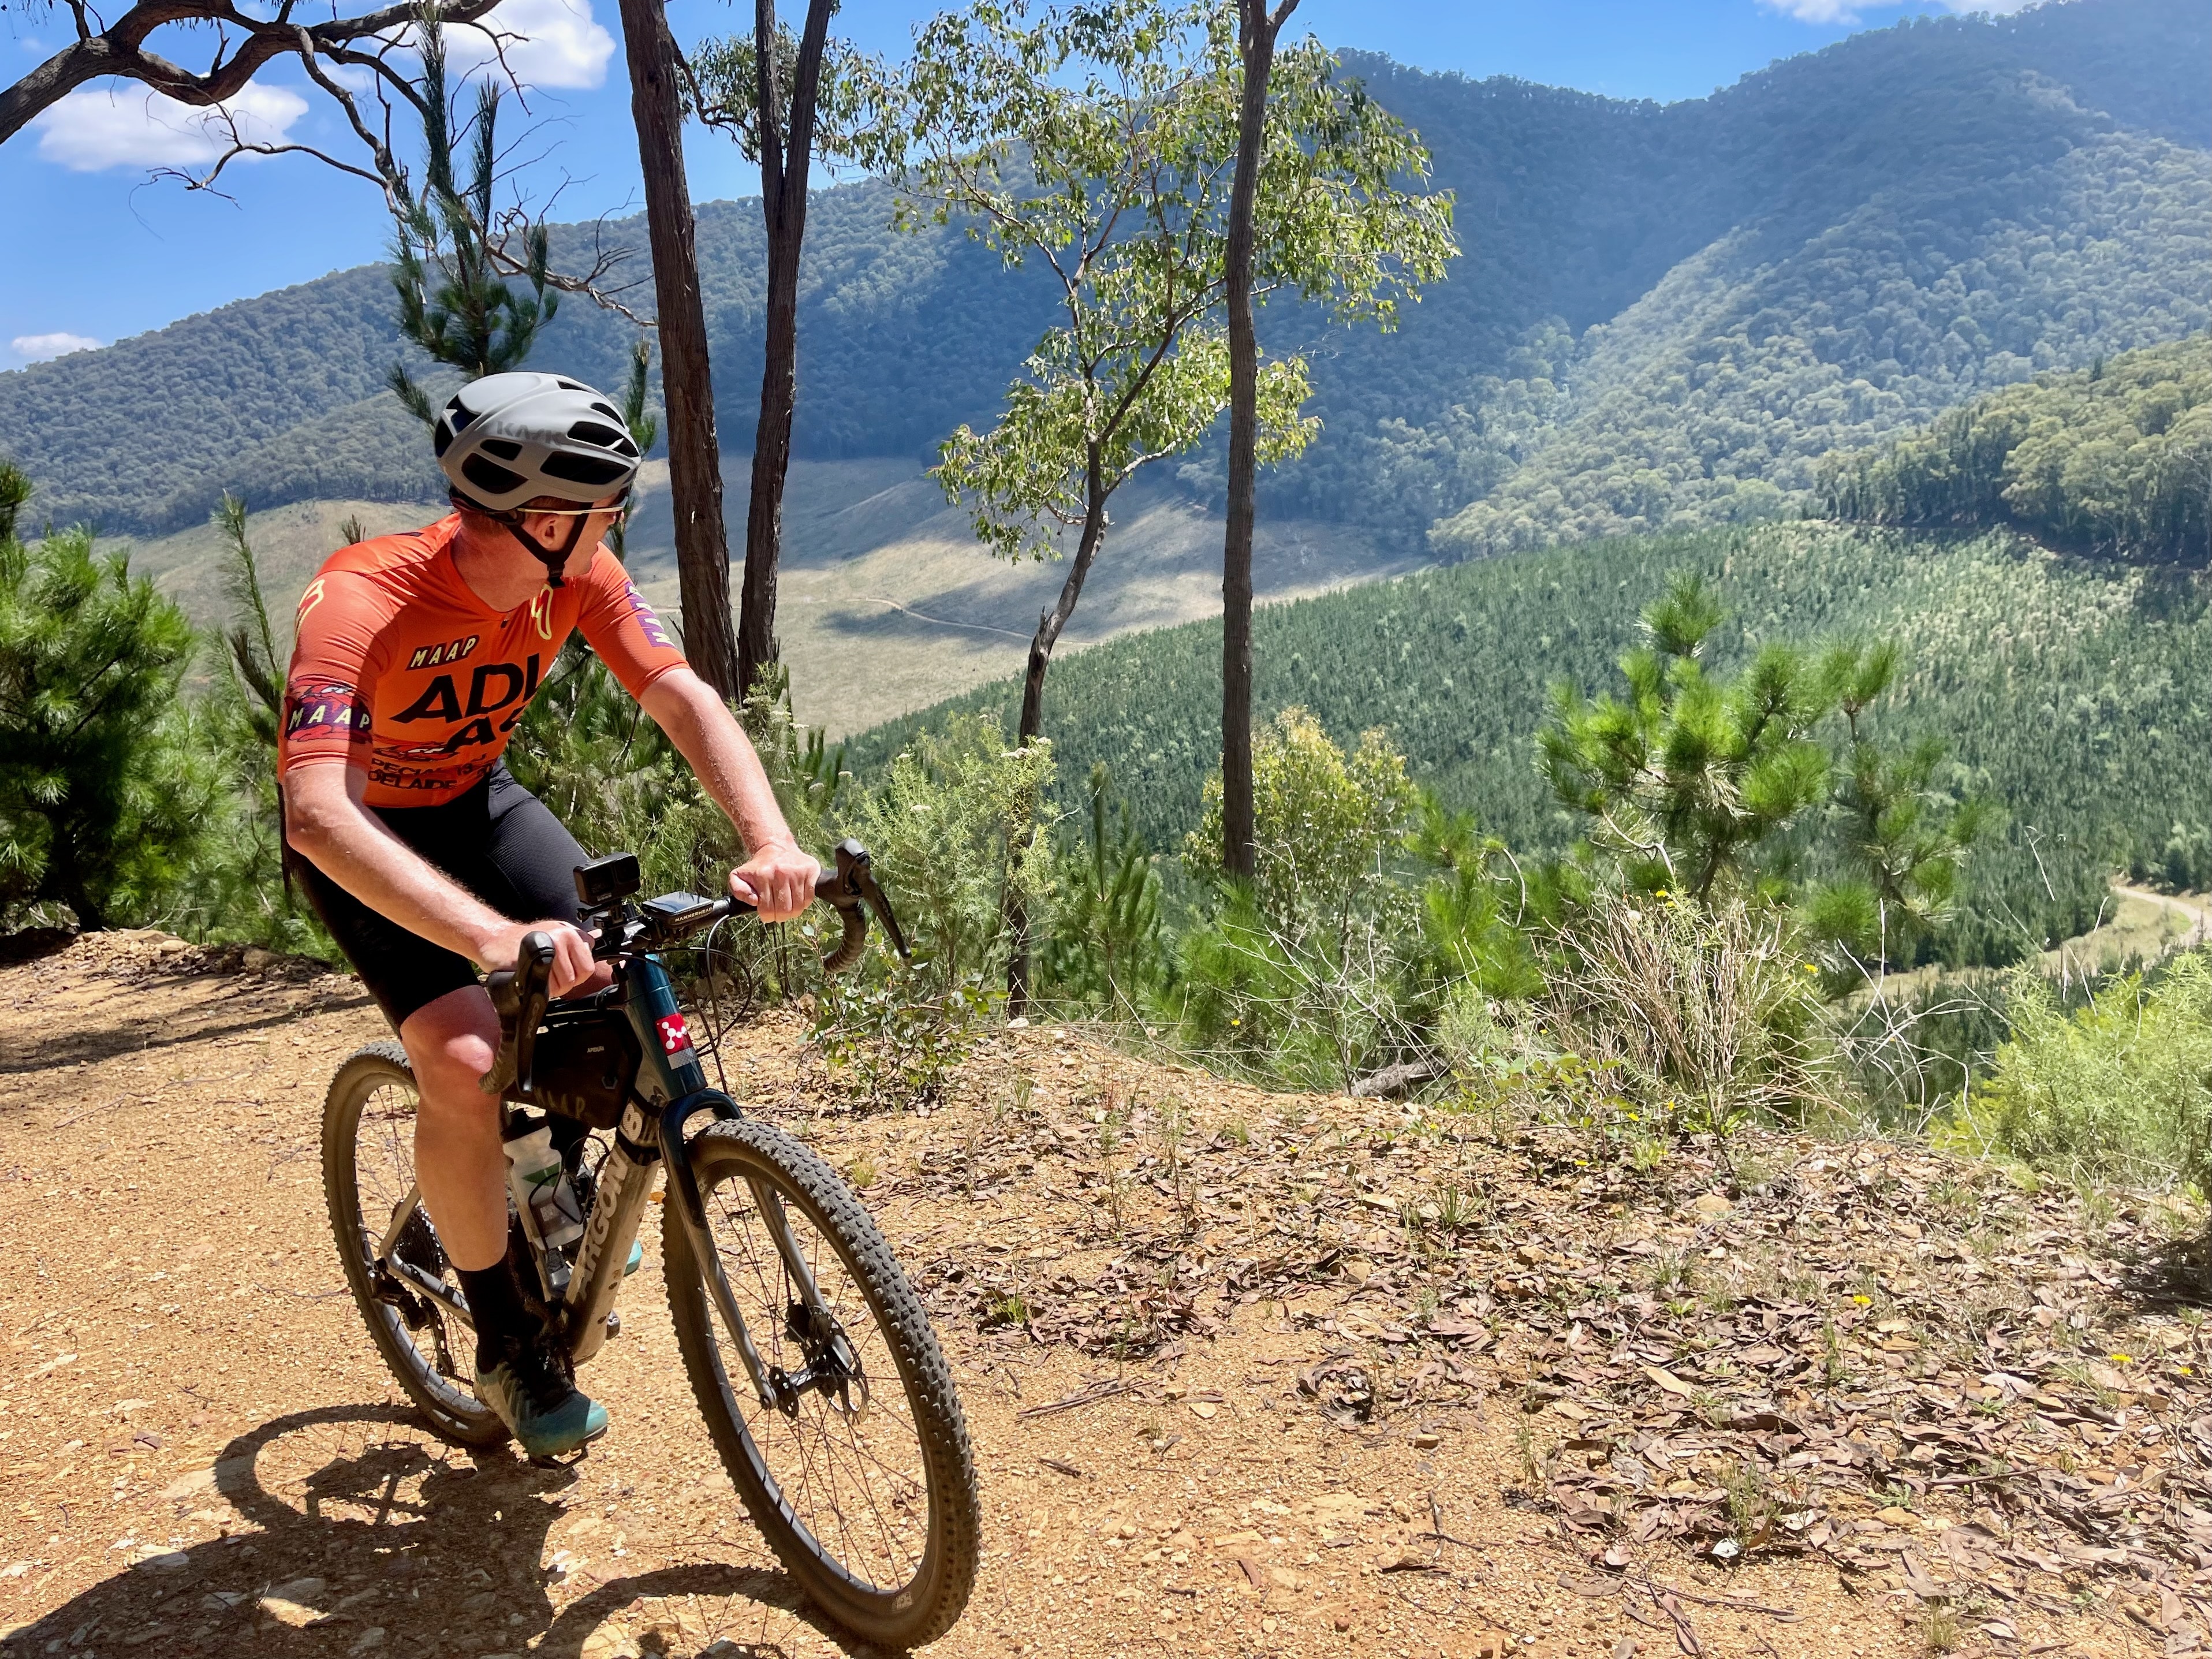 A cyclist climbing up a gravel road with views of tree covered valleys and mountains in the background